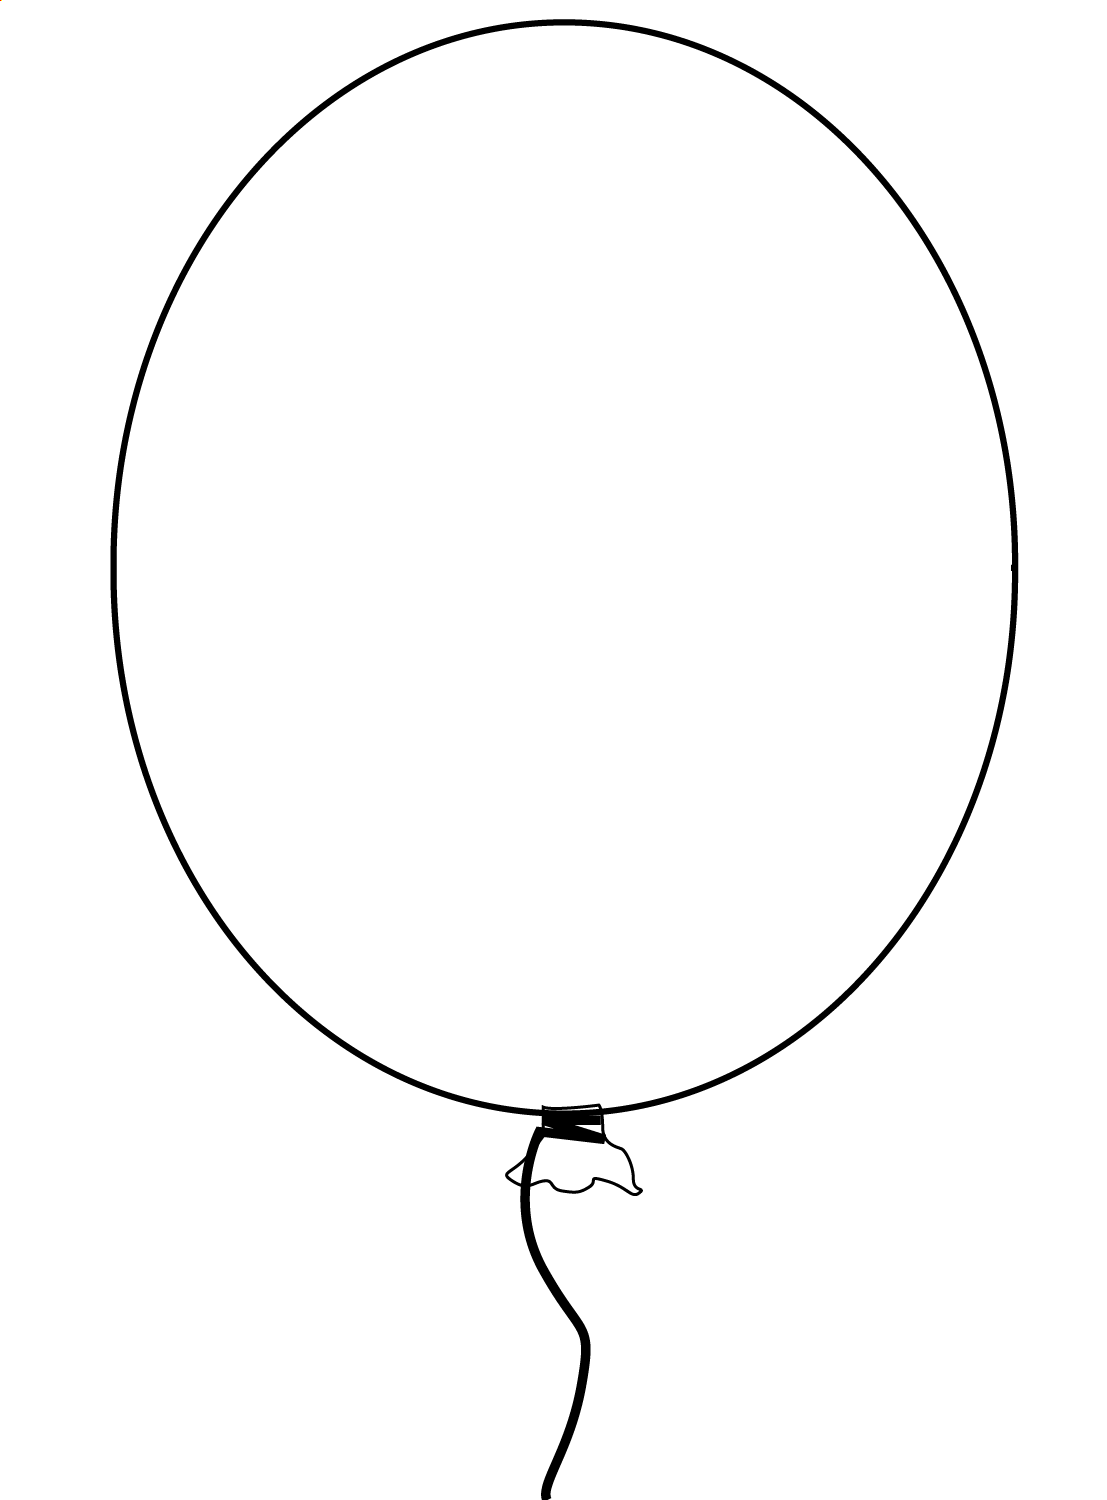 Alone Balloon Coloring Page